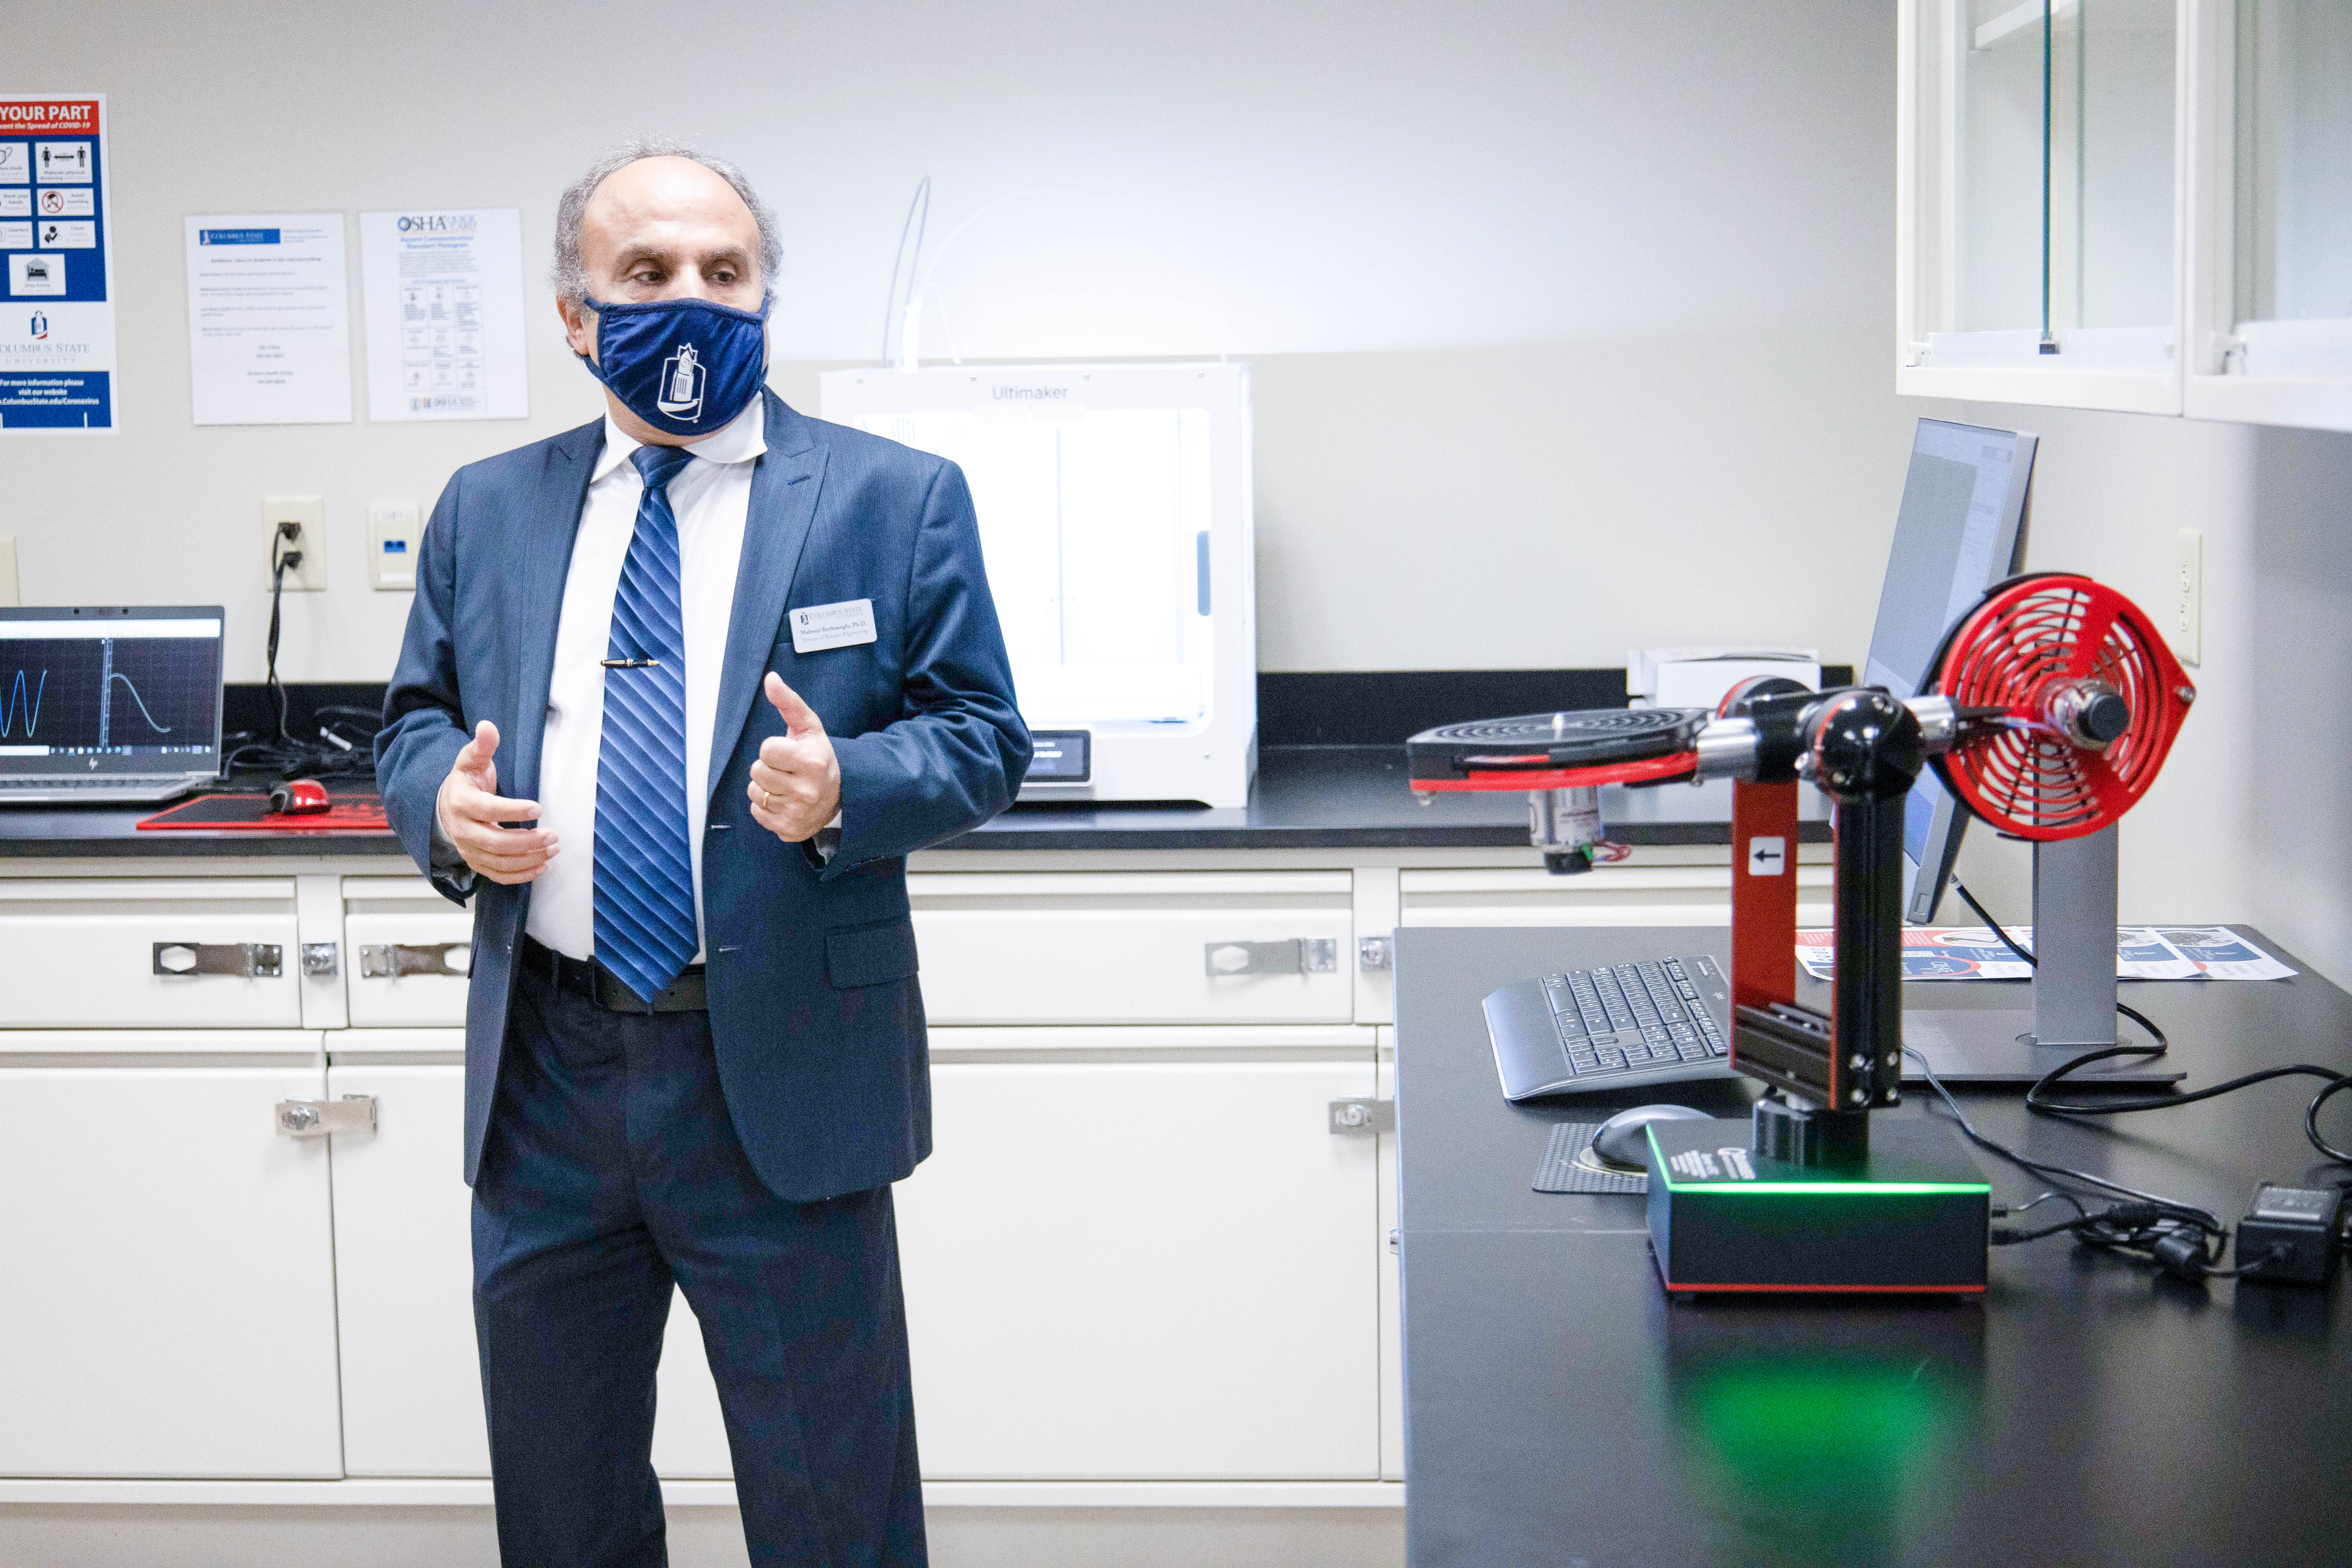 Dr. Reyhanoglu in a suit stands near a red and black robot on a laboratory desk.